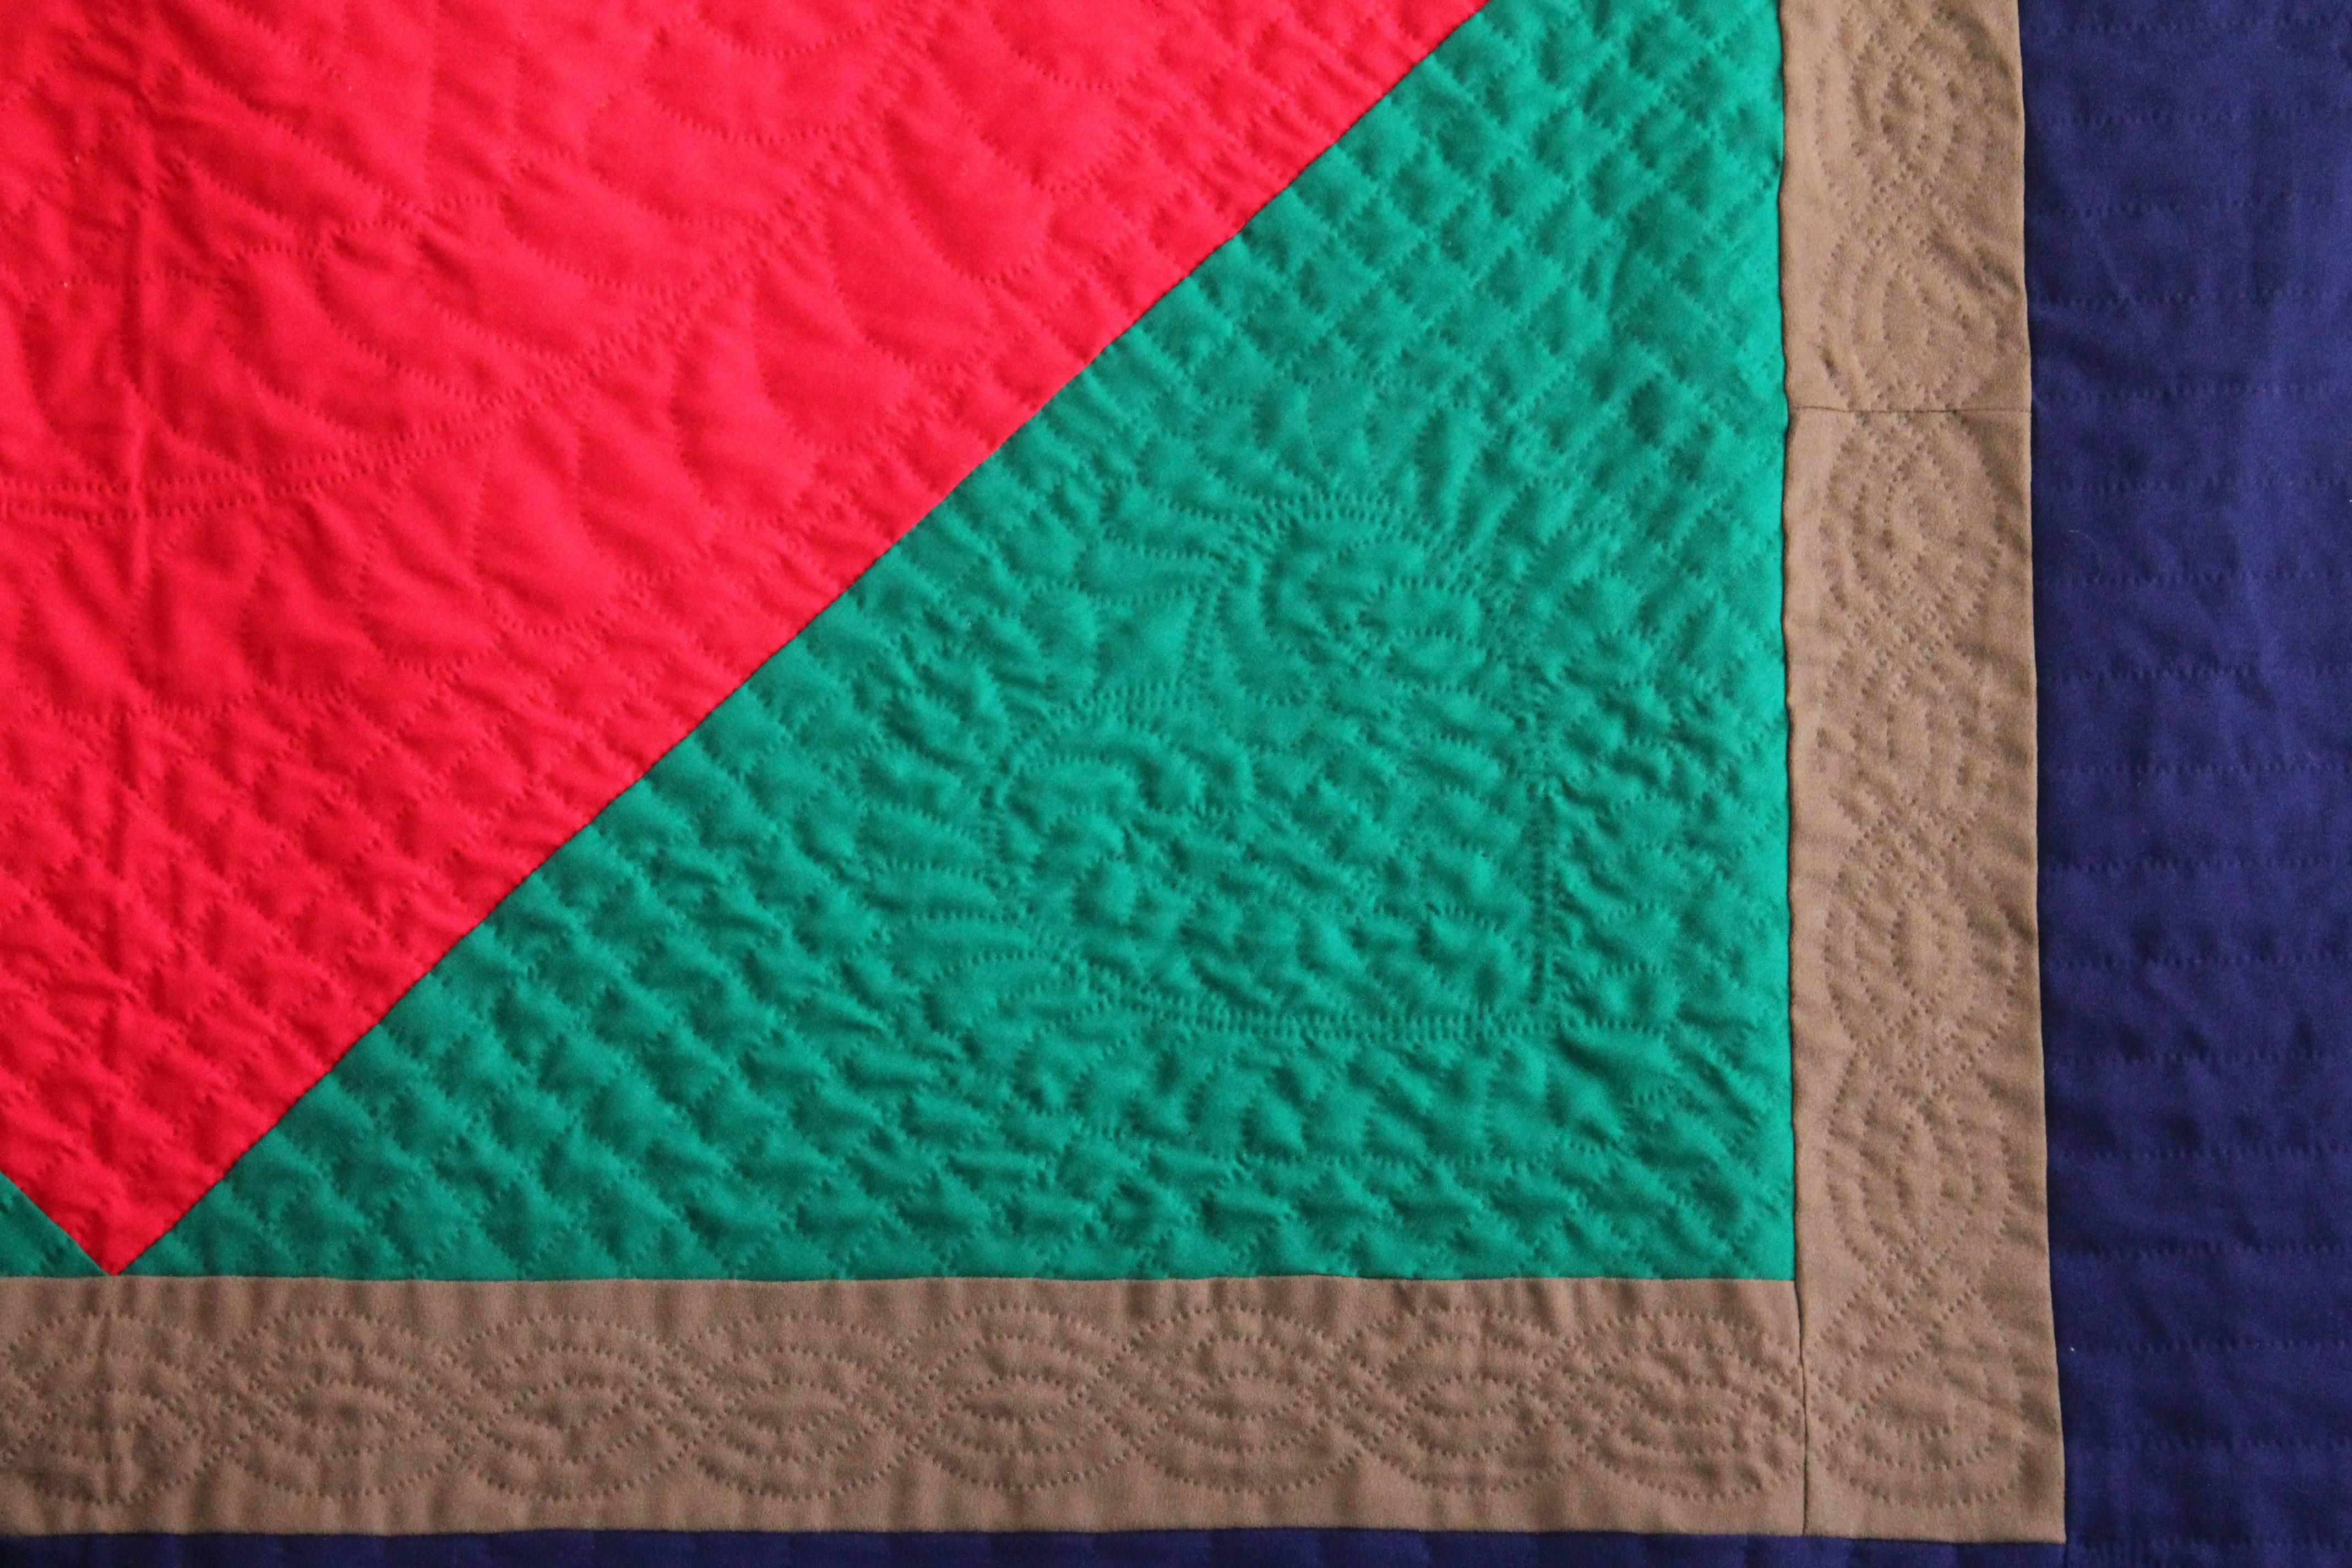 Country Wool Quilt Diamond in a Square / Lancaster County, Pennsylvania